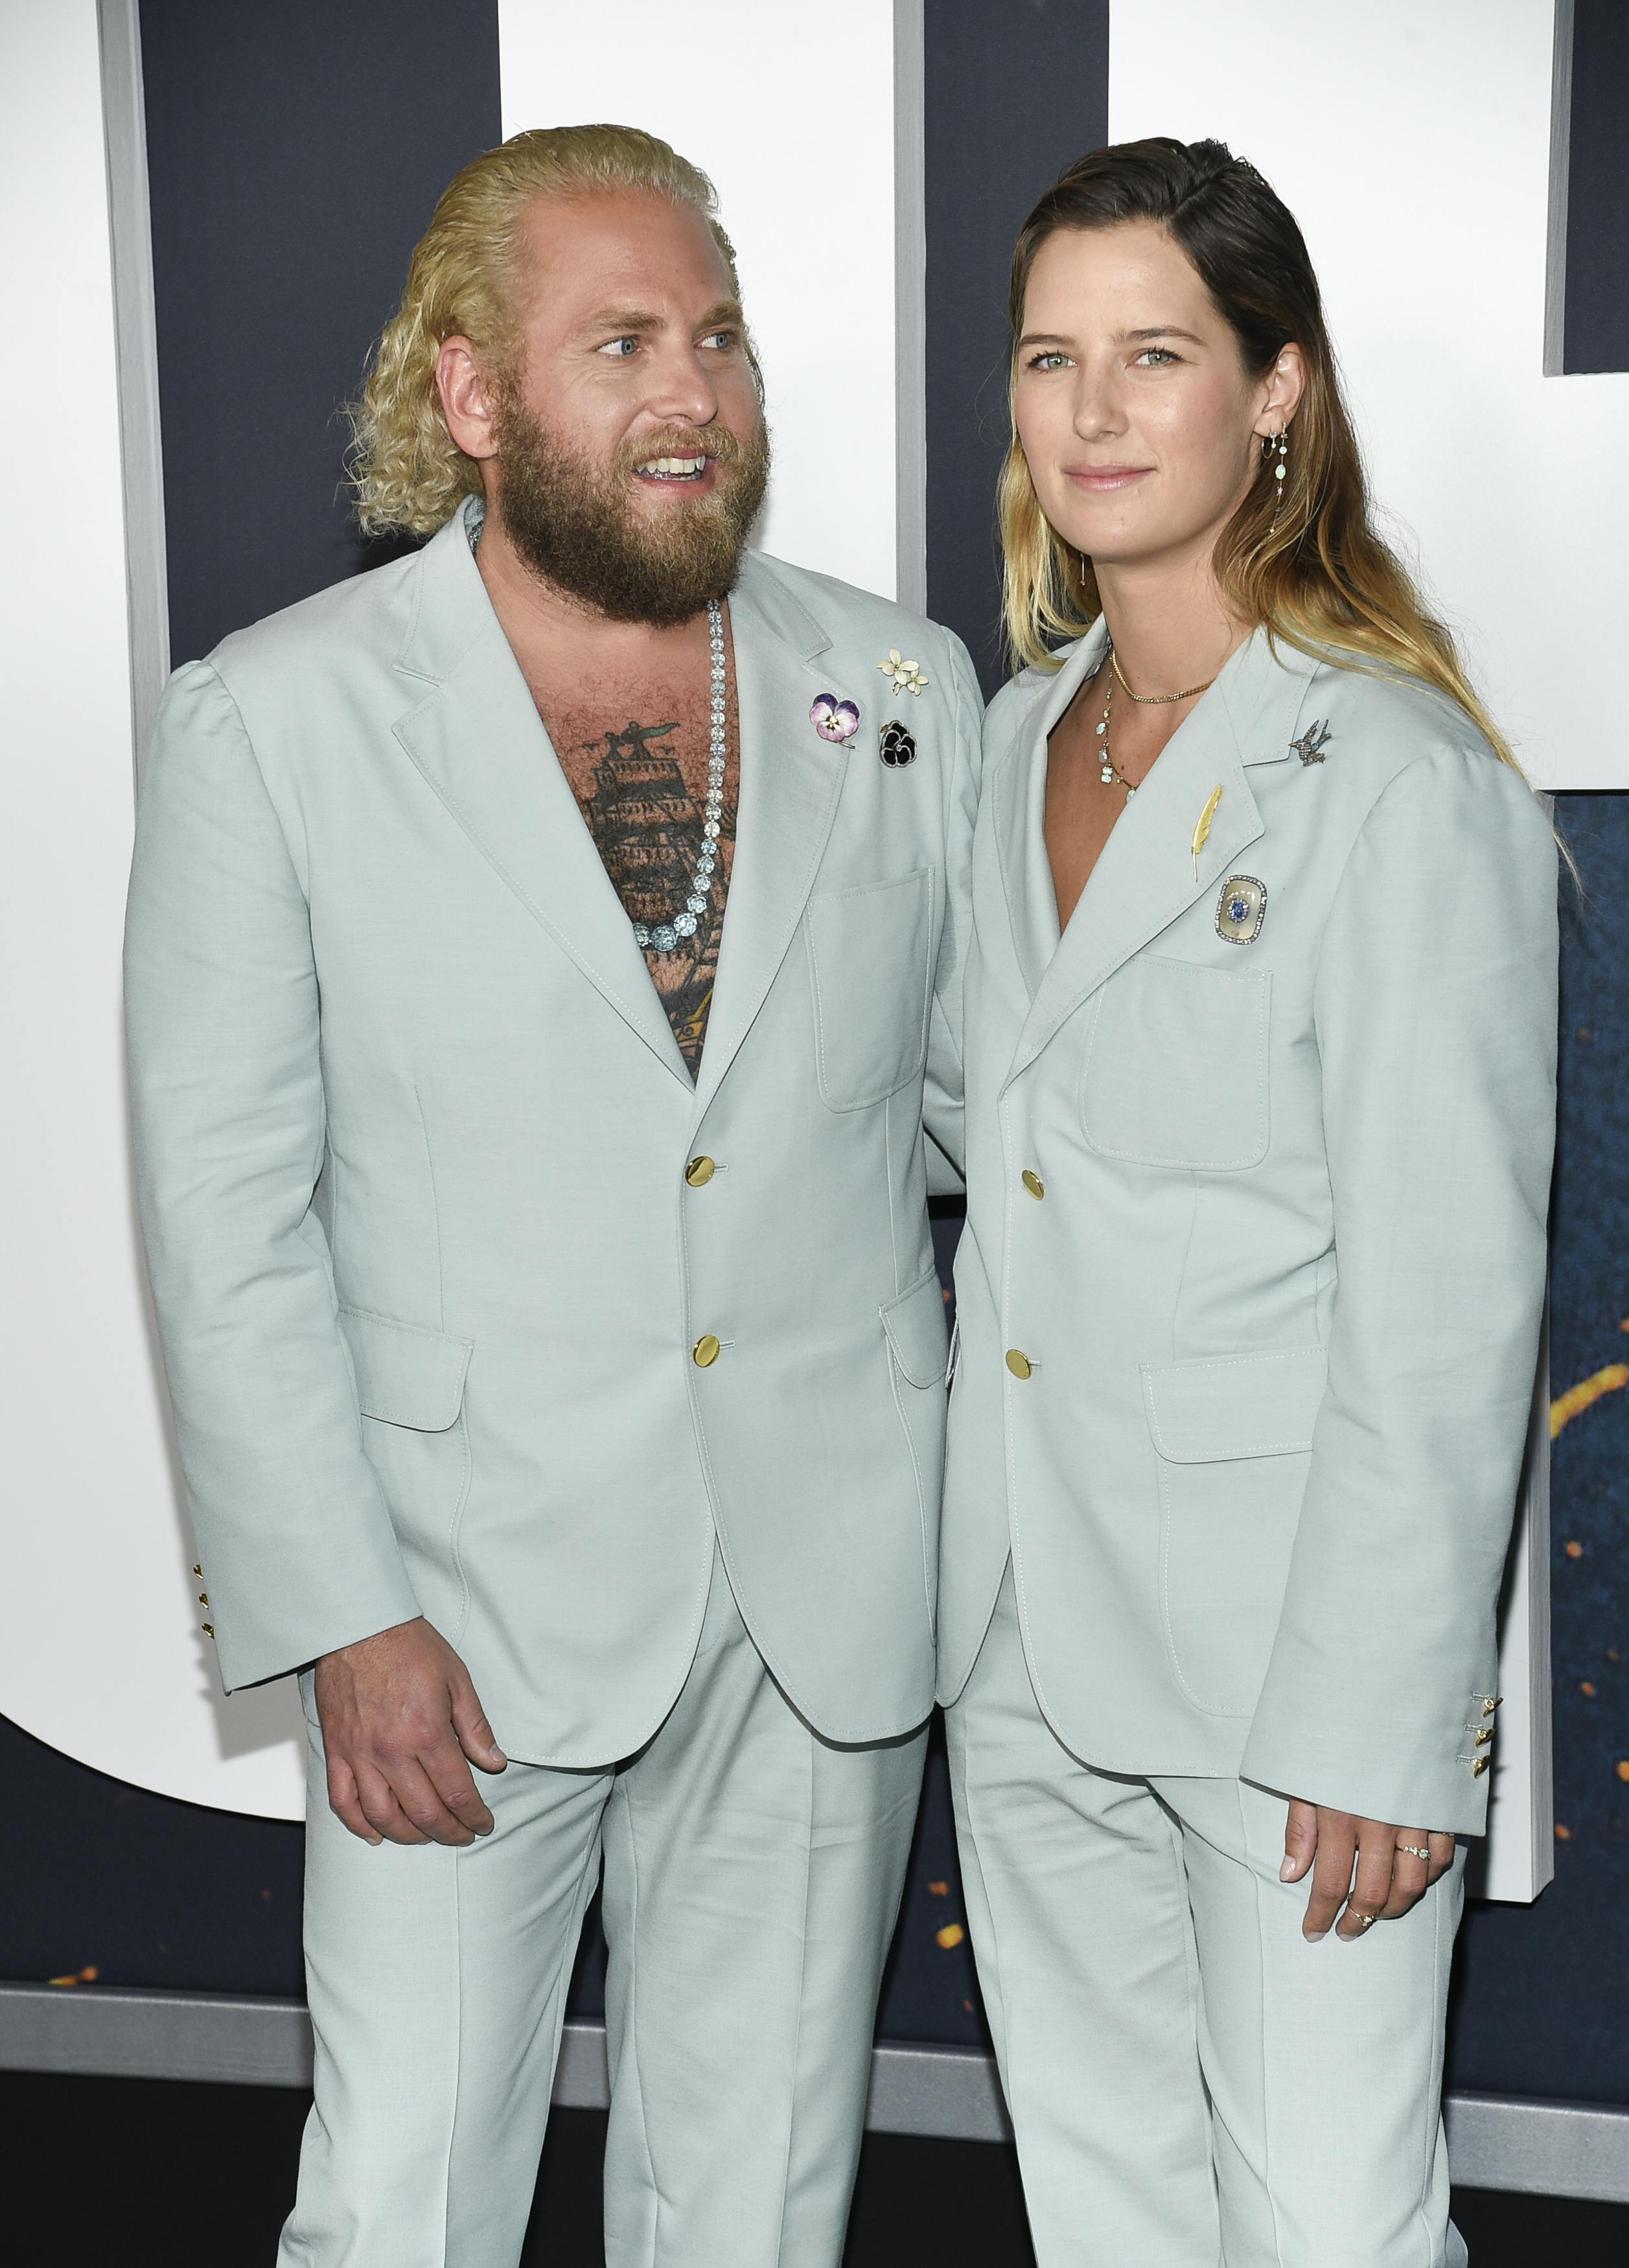 Jonah Hill, left, and Sarah Brady attend the world premiere of "Don't Look Up" at Jazz at Lincoln Center on Sunday, Dec. 5, 2021, in New York. (Photo by Evan Agostini/Invision/AP)